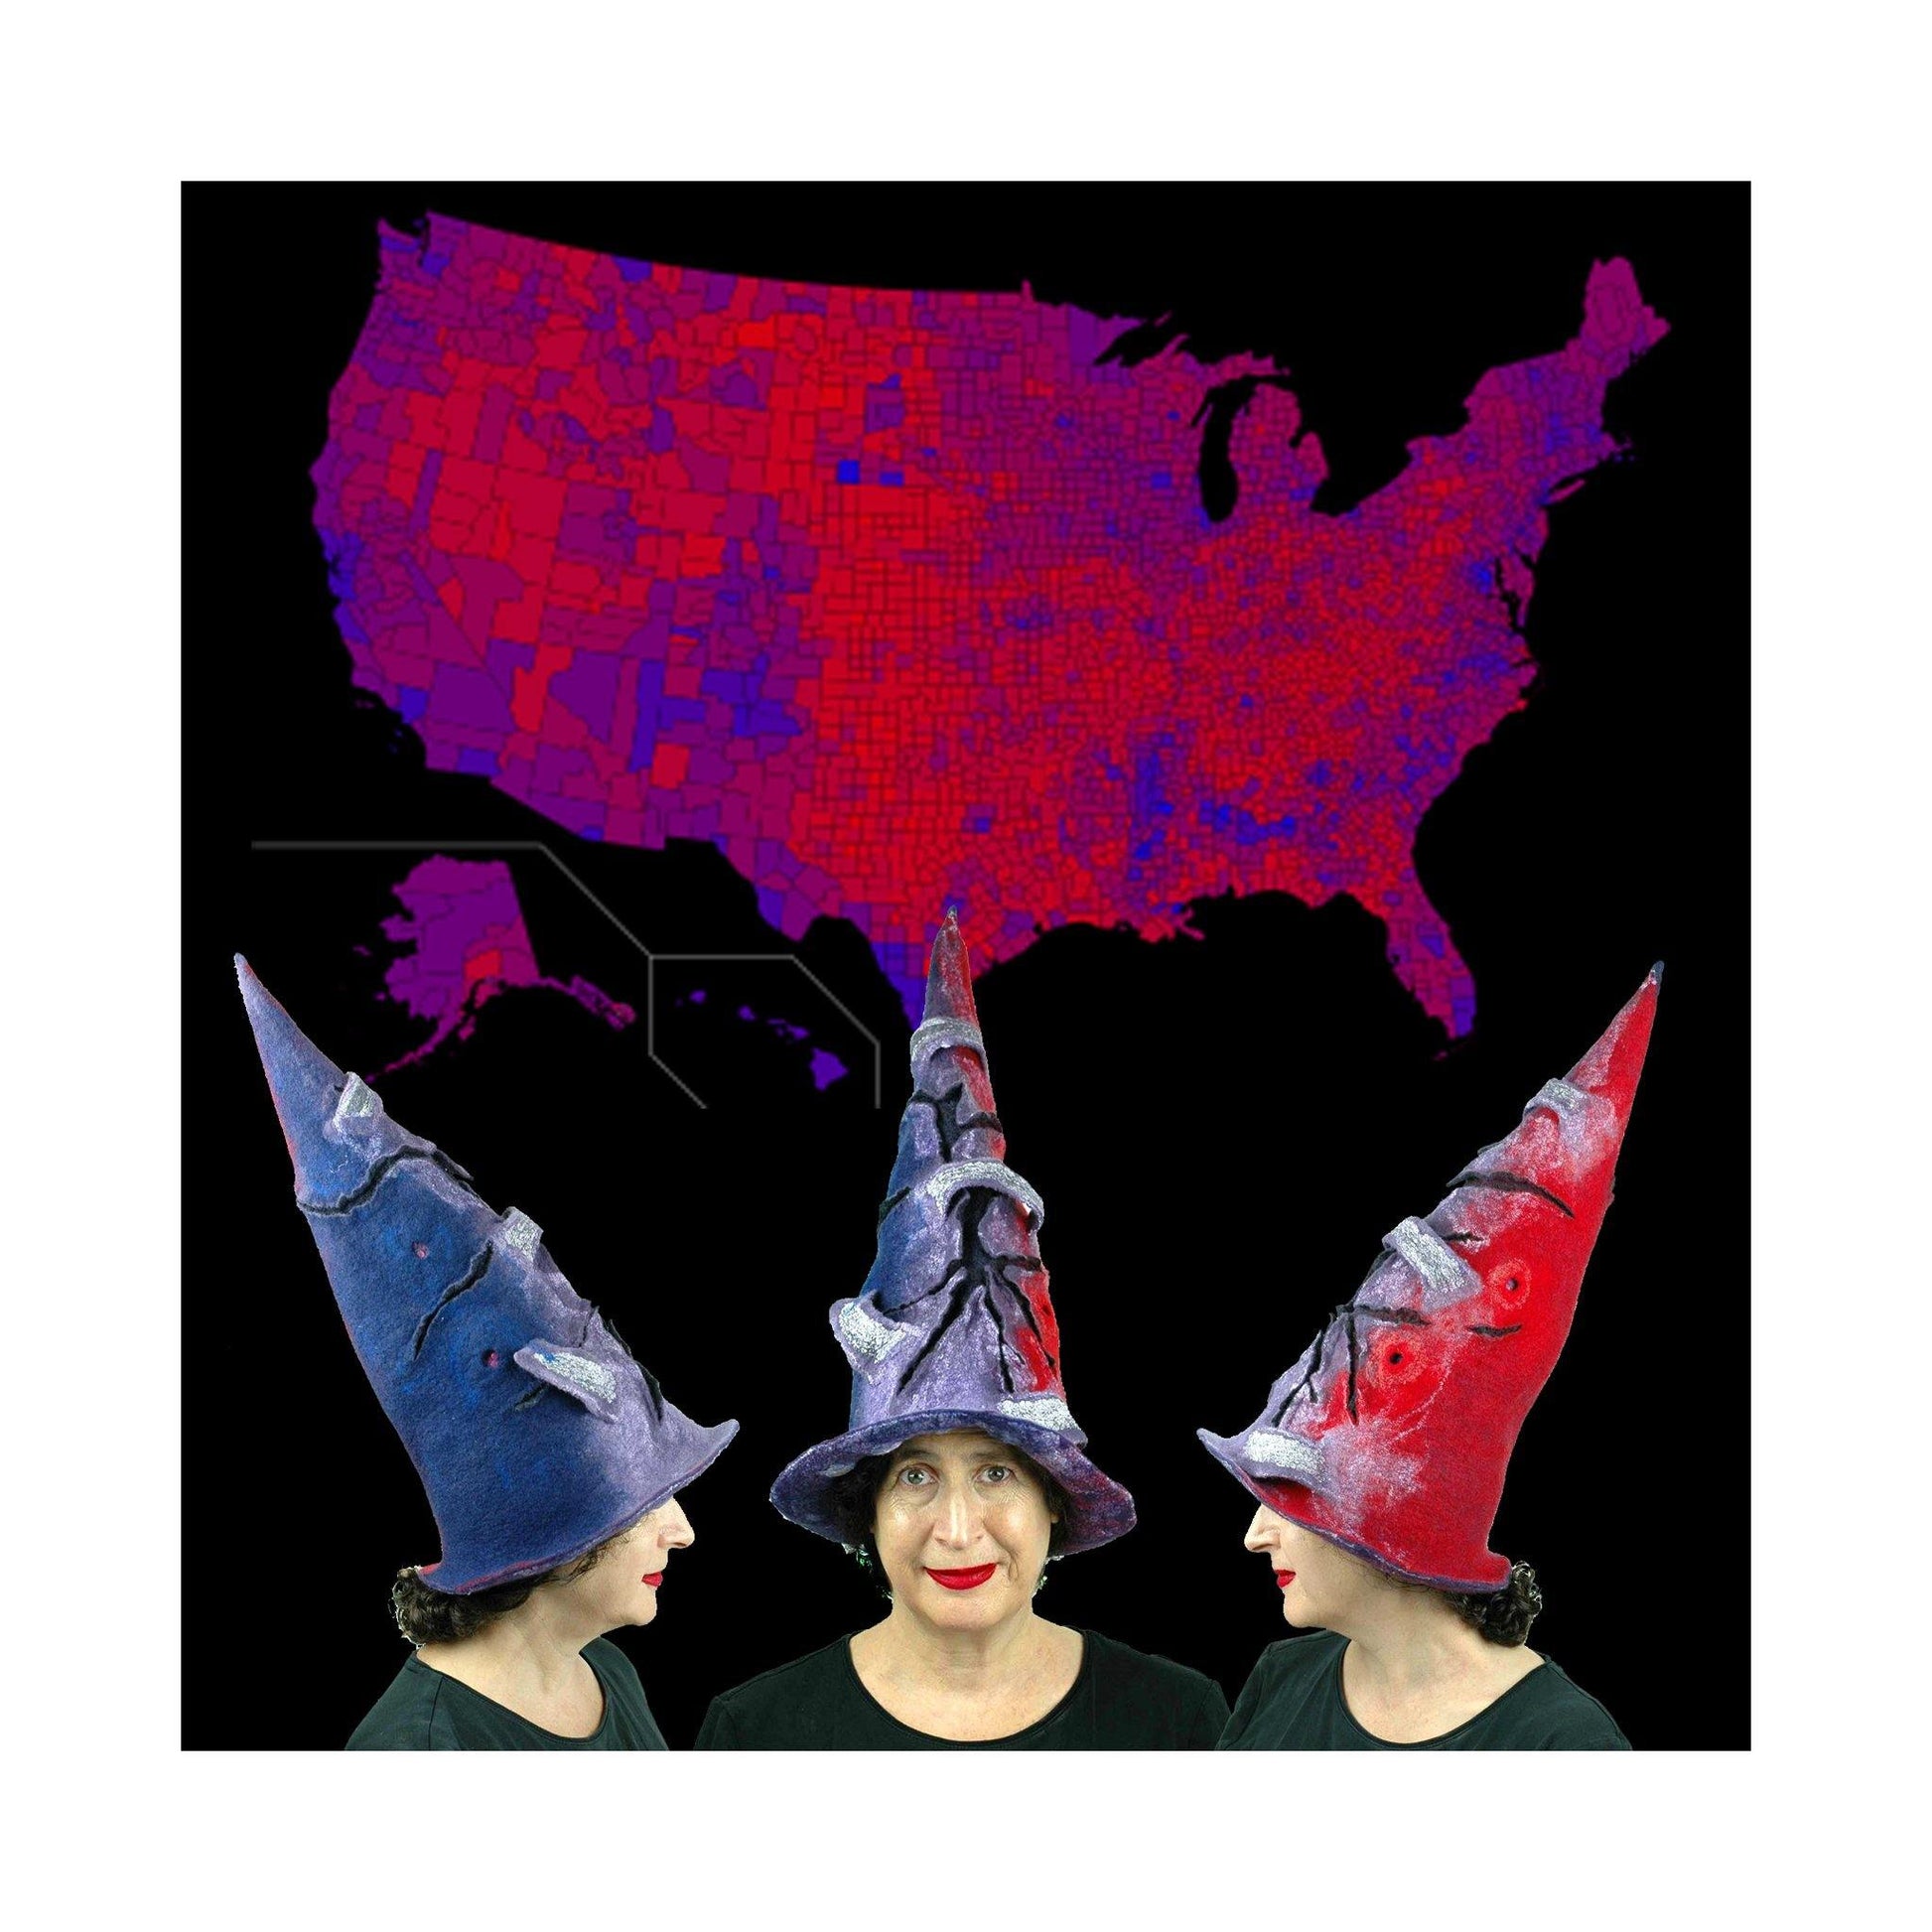 Three angles of the Violet Protest Hat seen agains a map of the United States that is red, blue and purple showing voter patterns from the 2016 election.